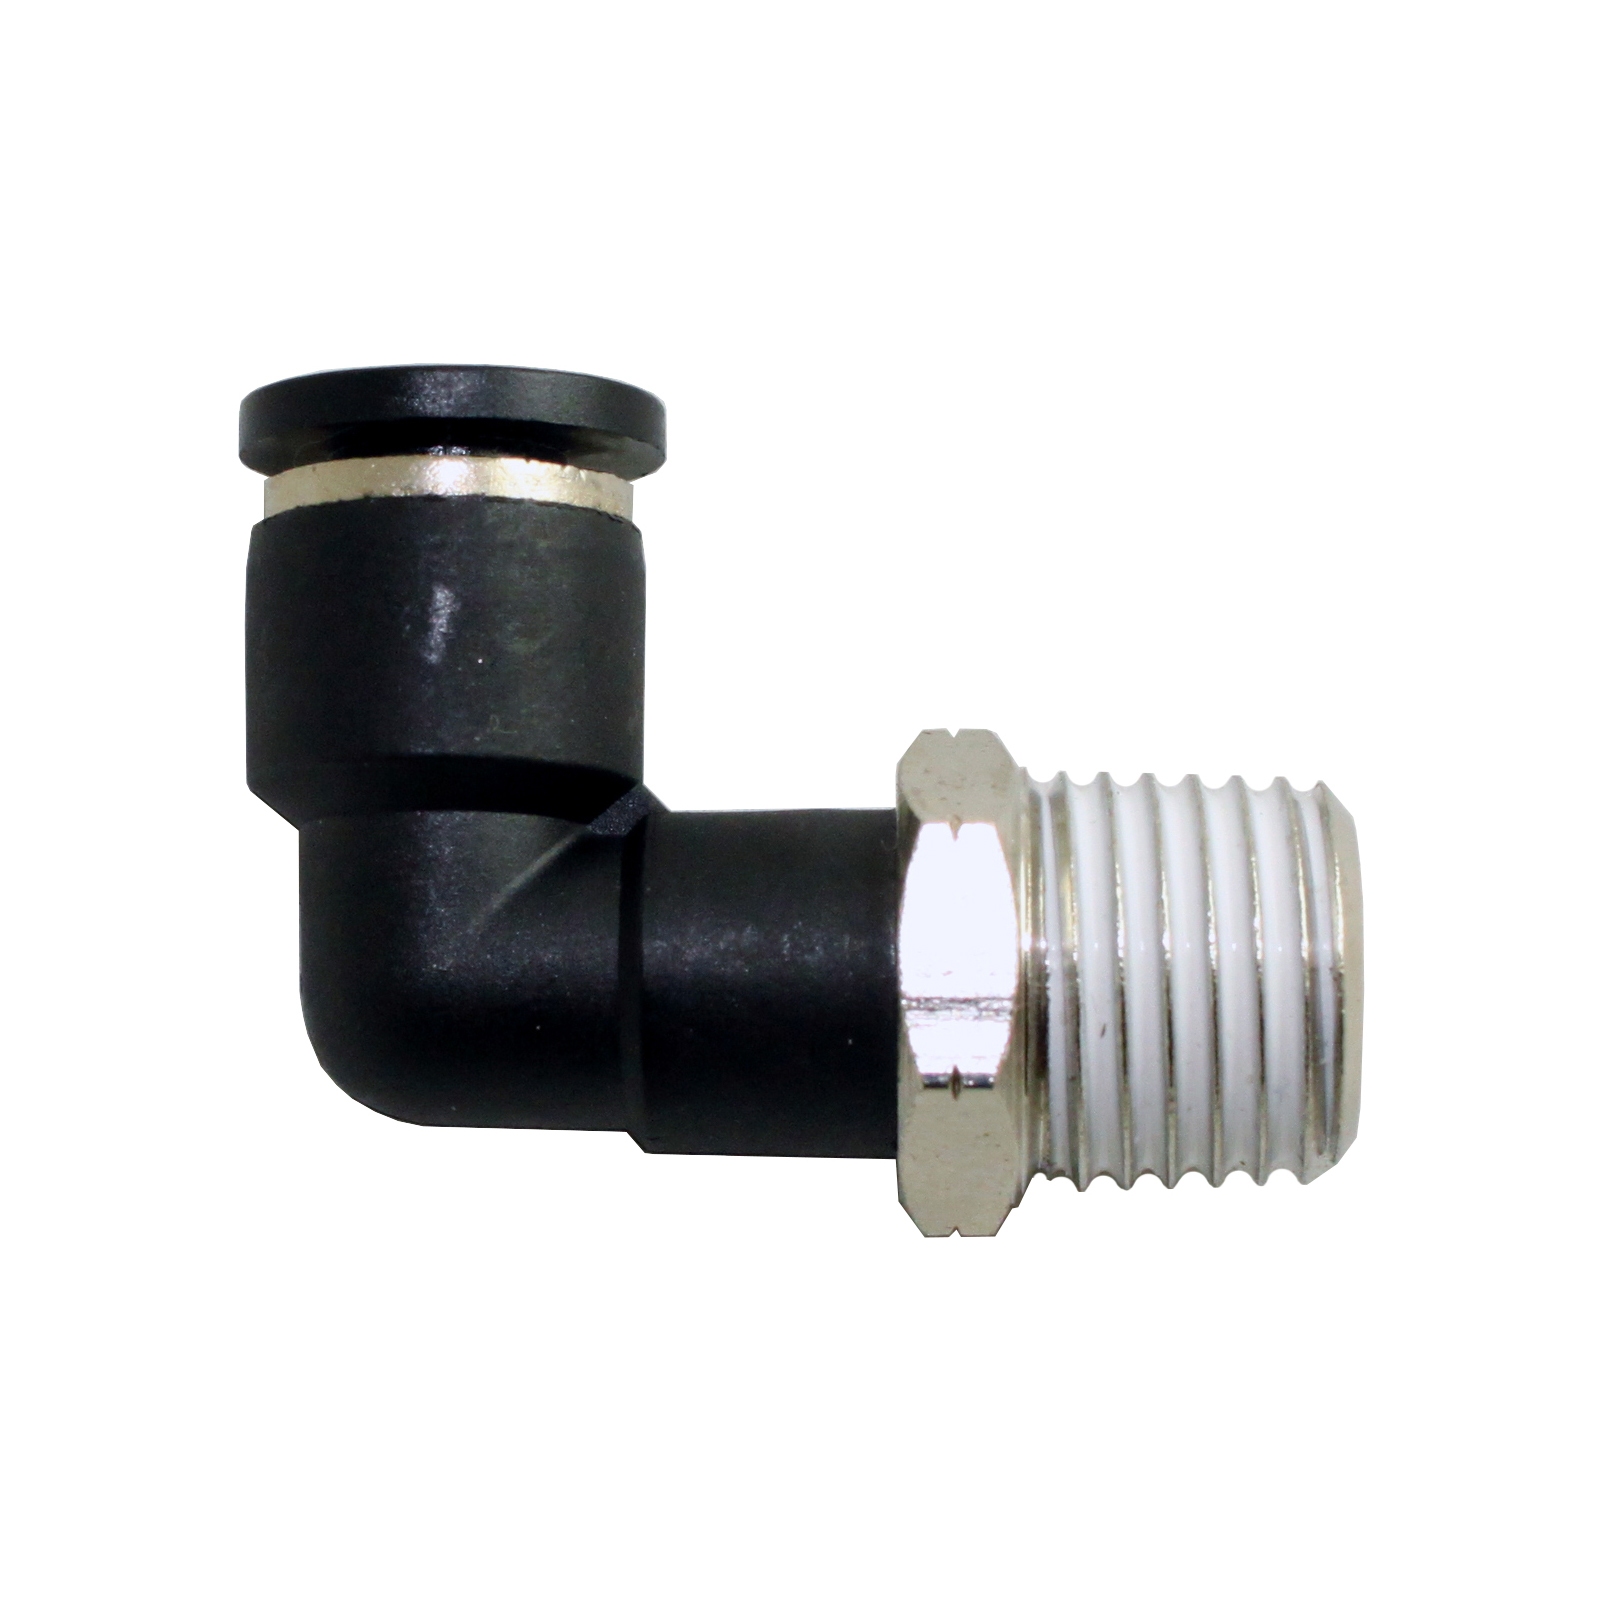 5/16 OD x 1/8 NPT One Touch Metal Push In to Connect Tube Fitting Male Run Tee 